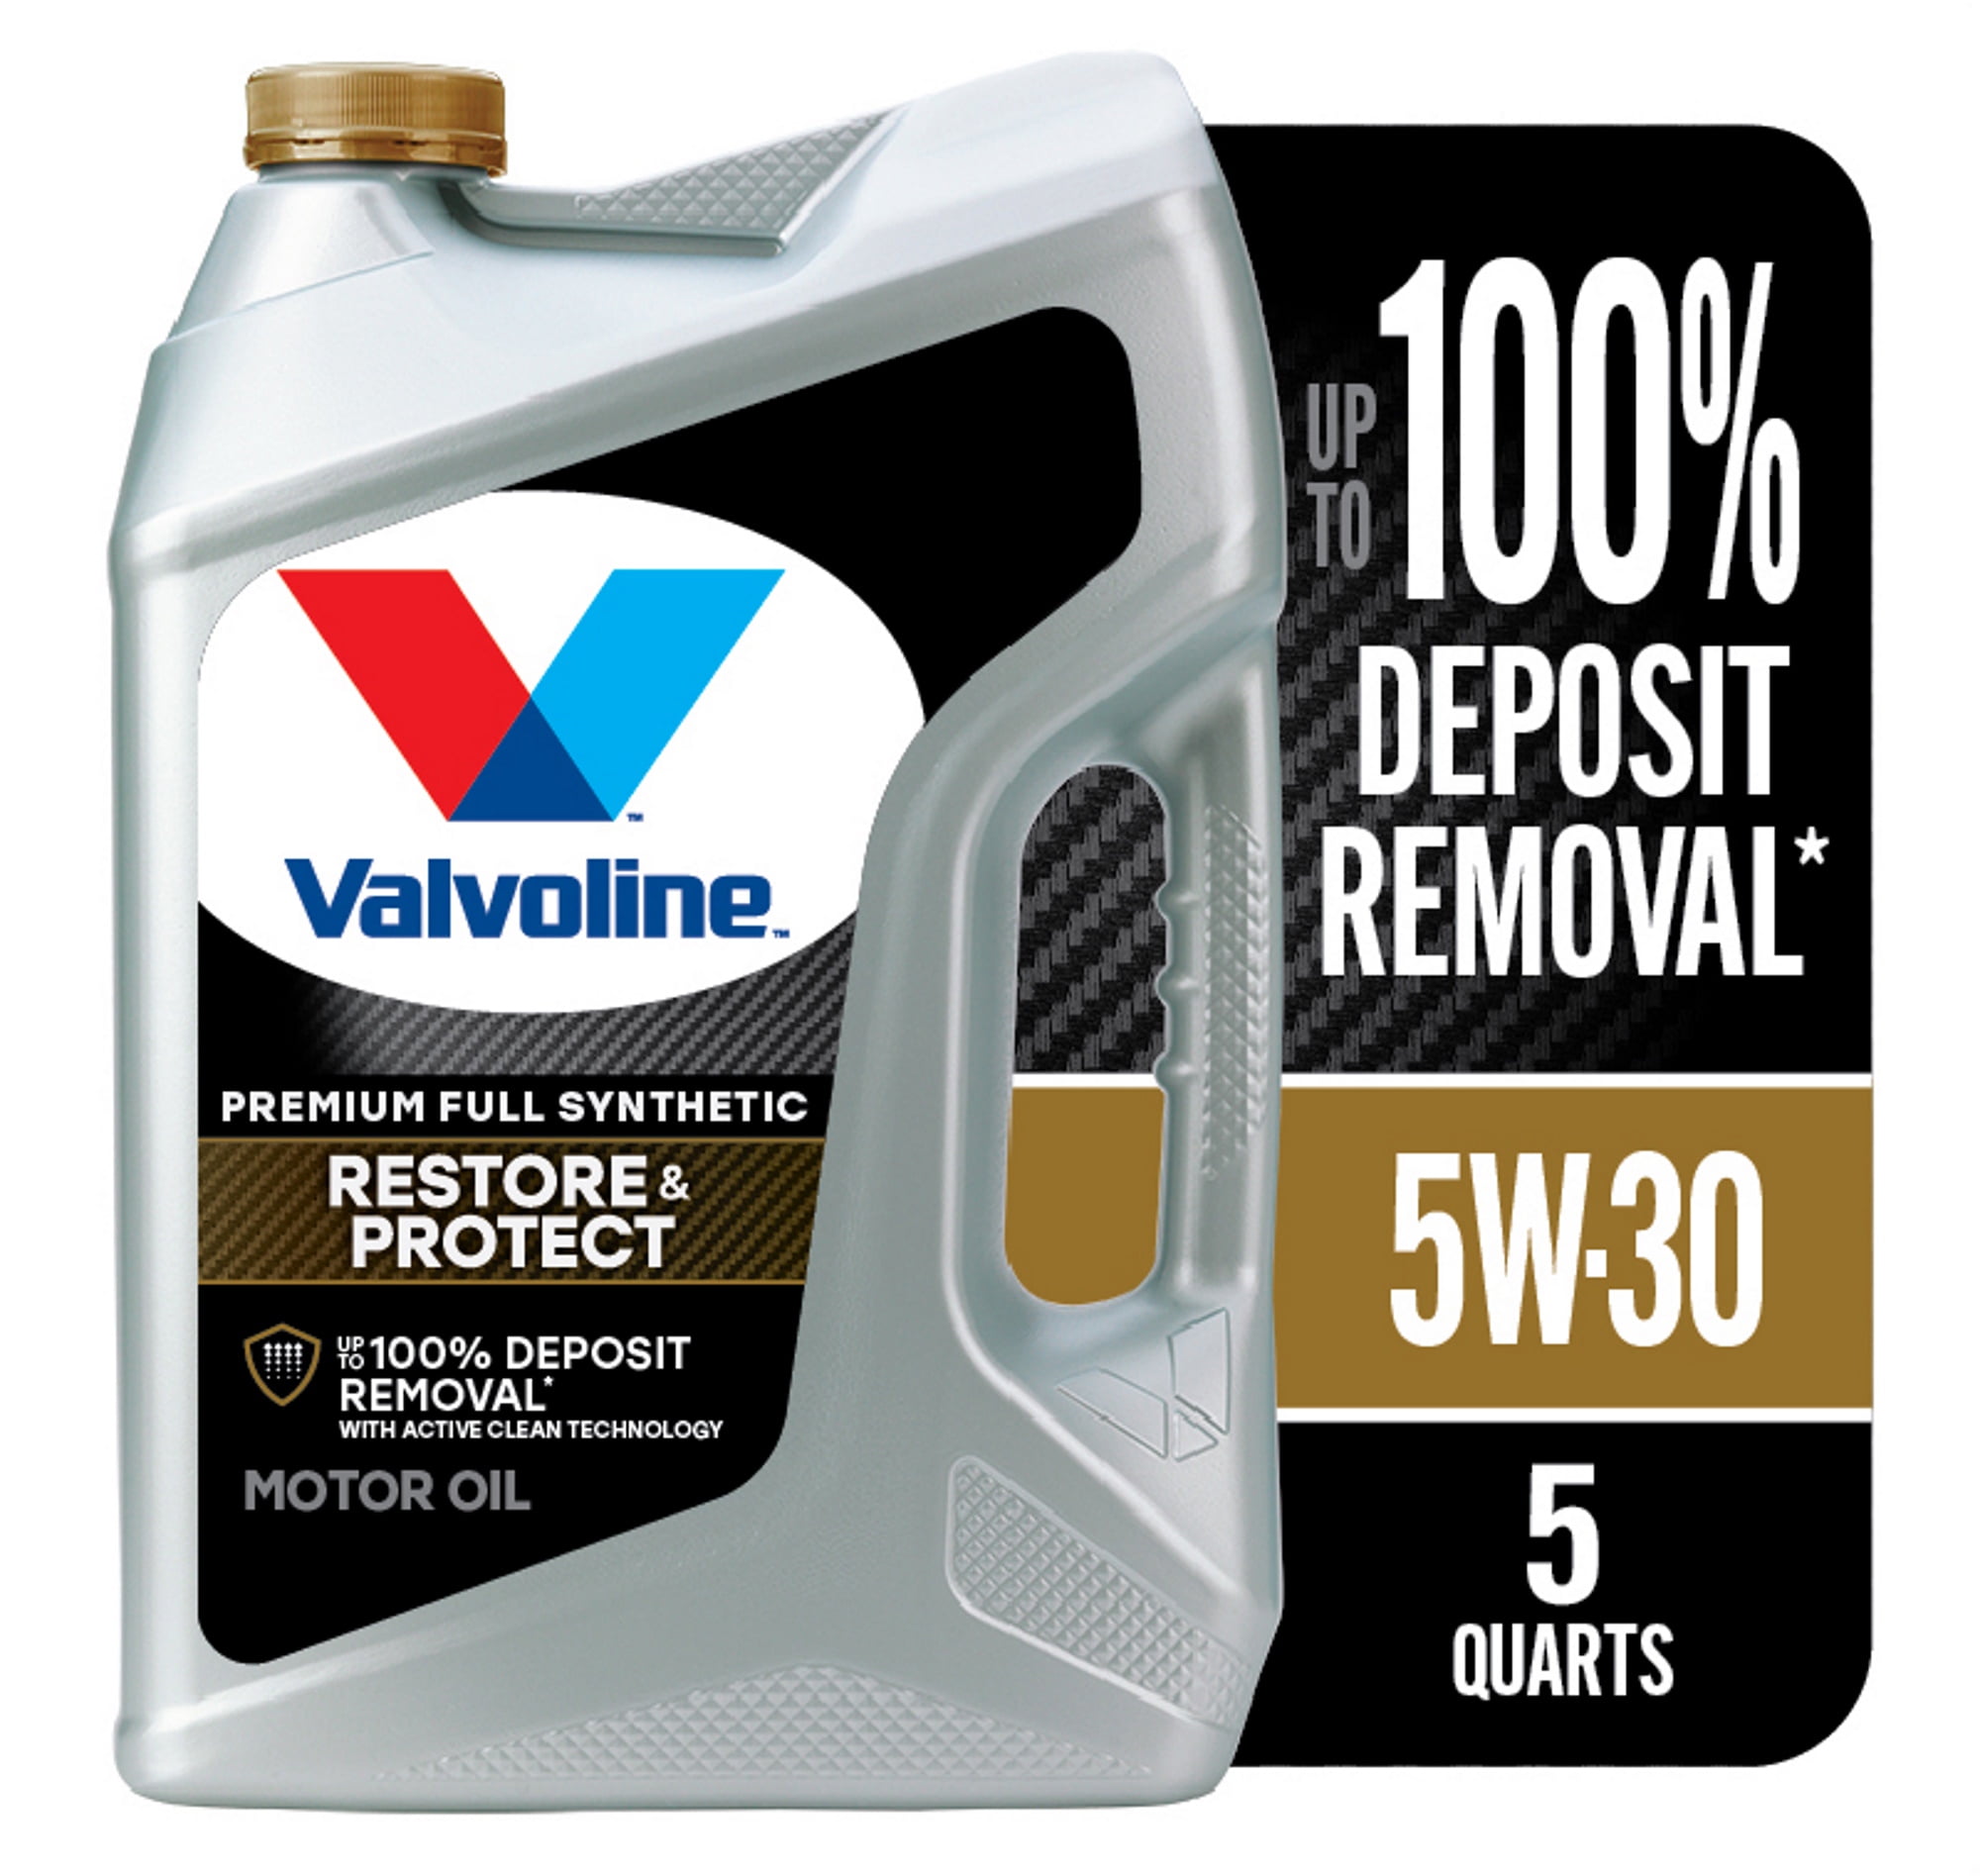 Valvoline Restore and Protect motor oil, 5QT, $30, Free Shipping over $35